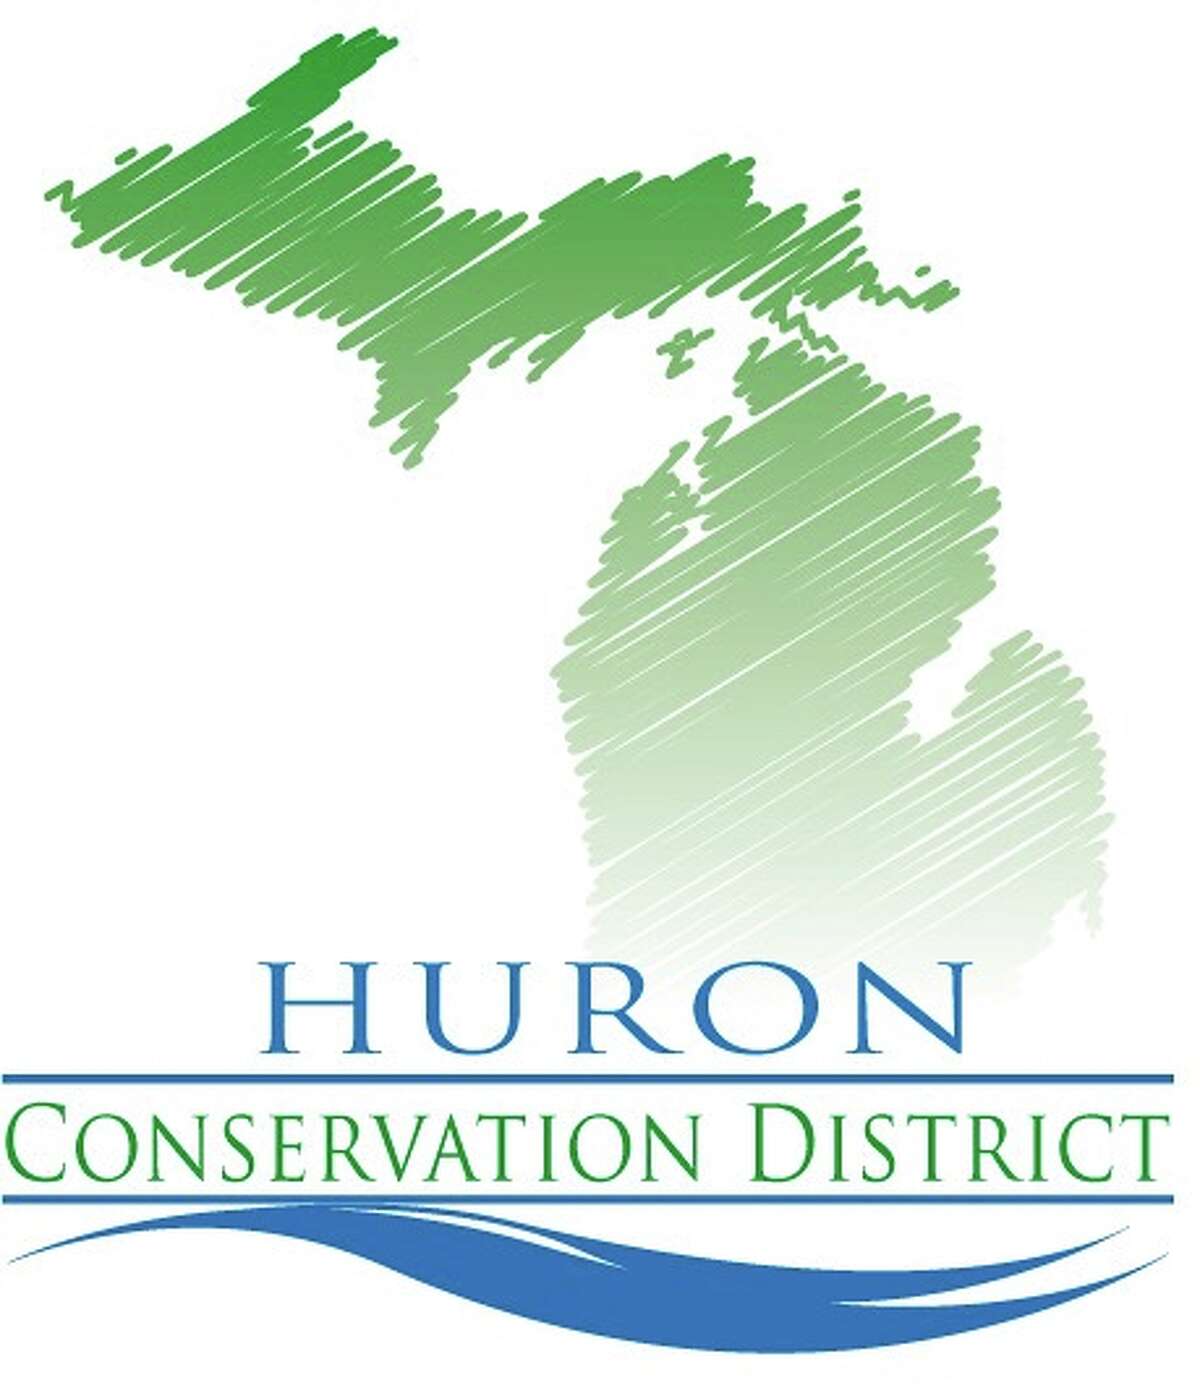 The Huron Conservation District has a mission is to maintain the economic viability of the agricultural communities, the recreational opportunities, and the tourism trade in Huron County, while improving and protecting water quality in the Saginaw Bay.